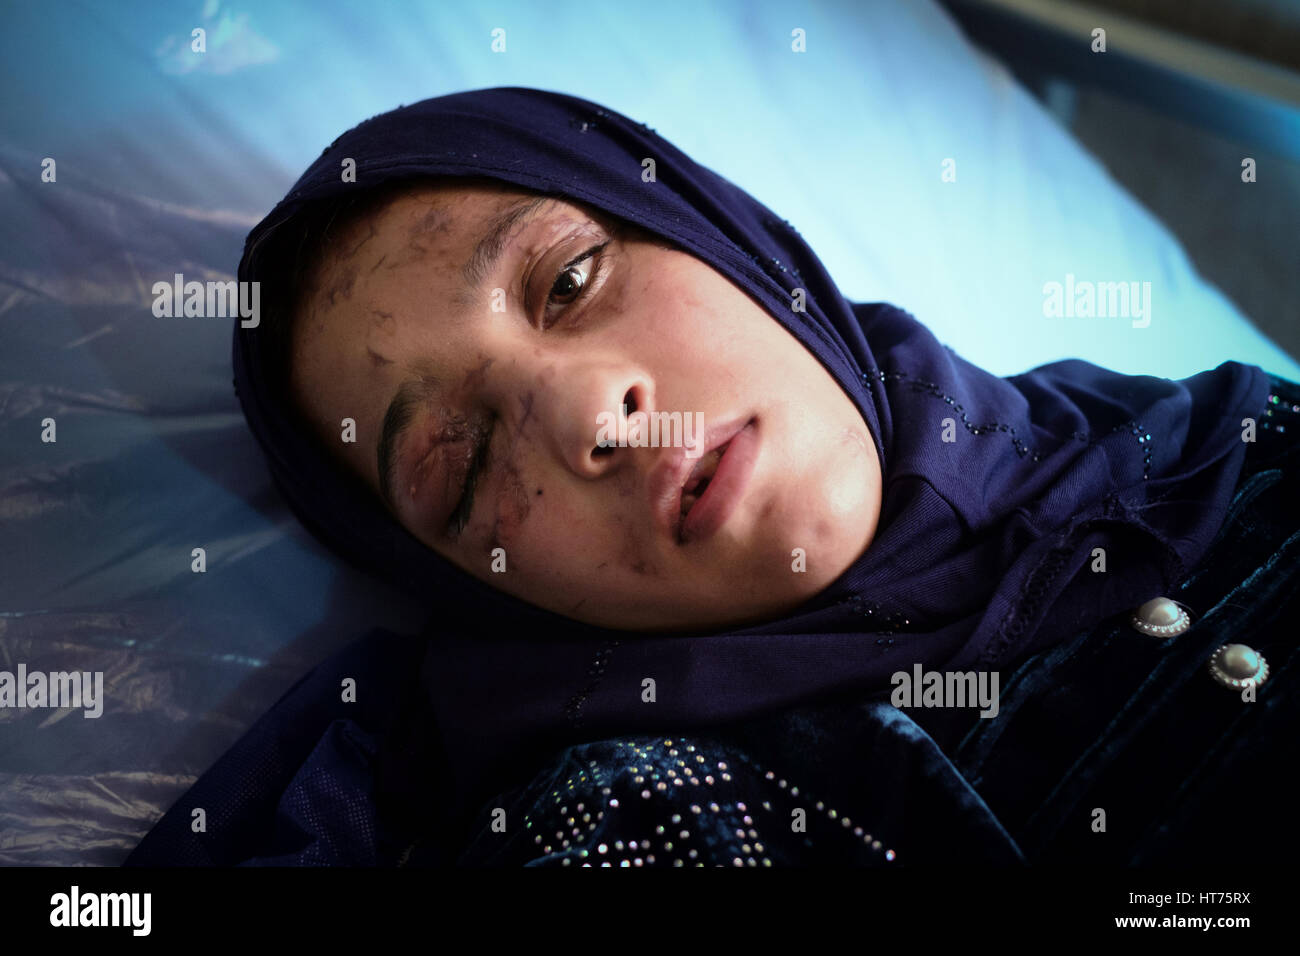 Injured Iraq civilian woman age 19 who lost her right arm and eye when a bomb fell on her house in during fighting to liberate Mosul, Iraq Stock Photo